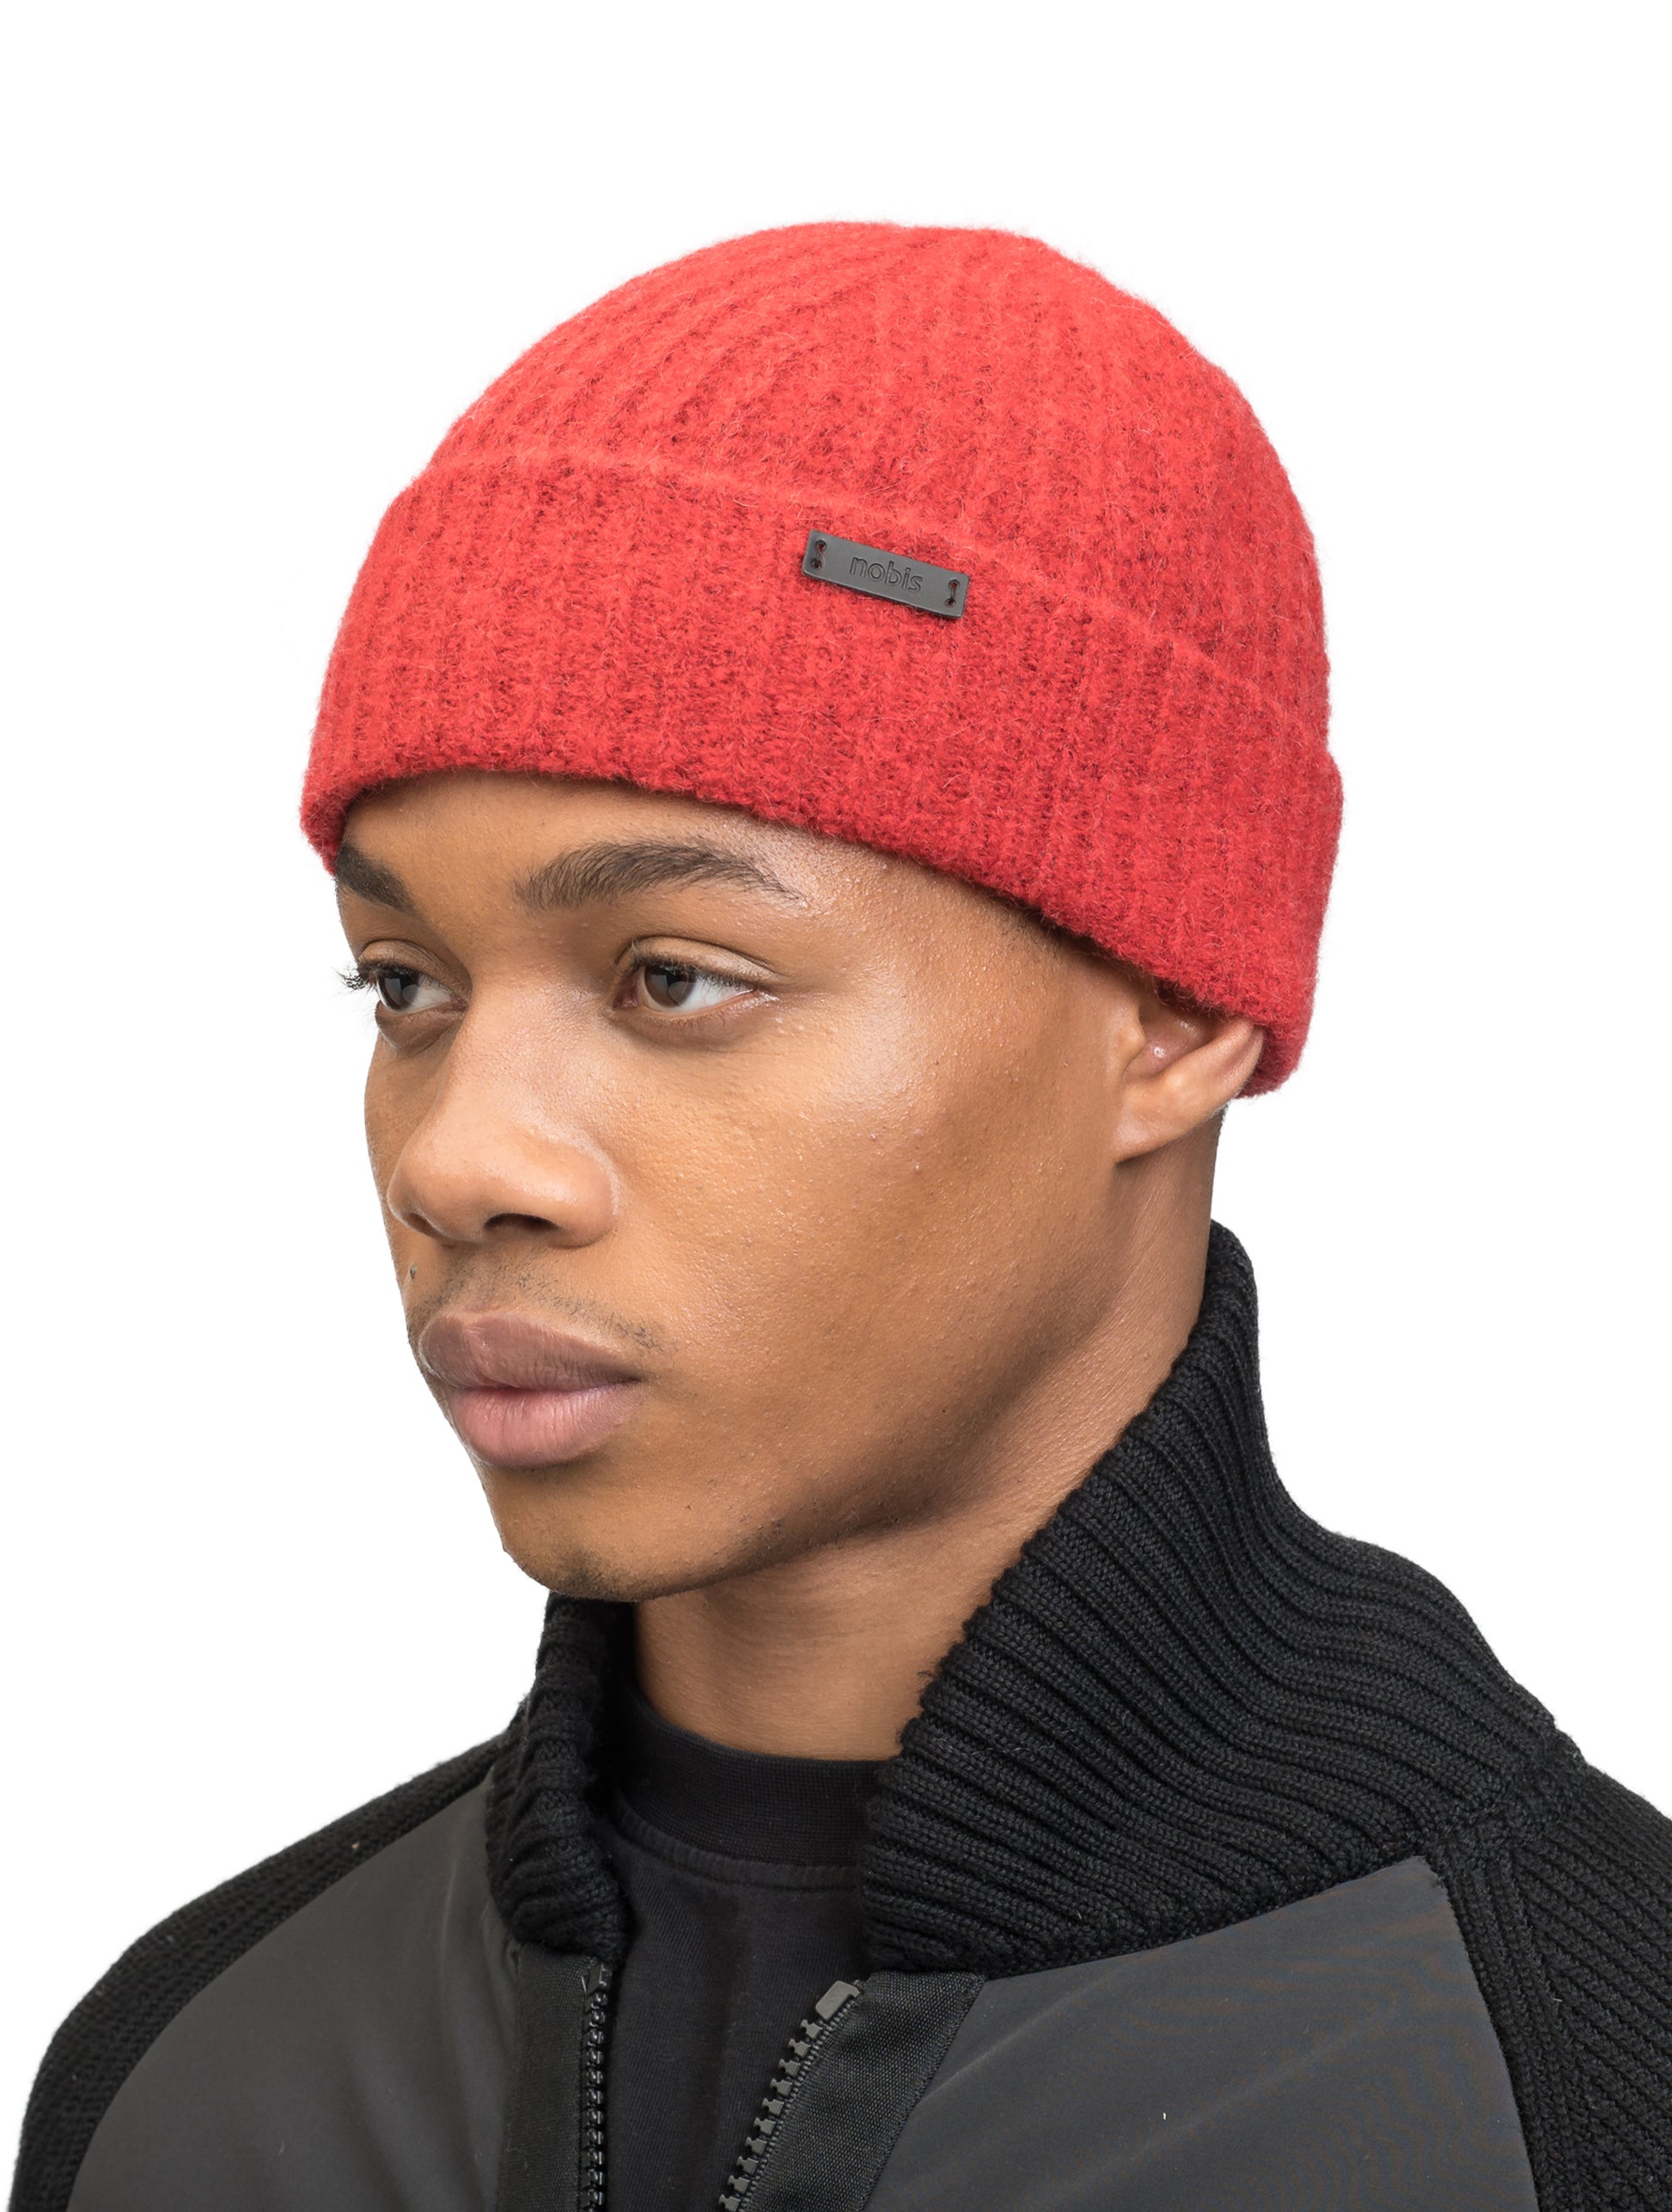 Dain Unisex Knit Watch Cap in superfine alpaca and merino wool, contrast colour knit along cuff, and Nobis embossed leather label at the cuff, in Vermillion